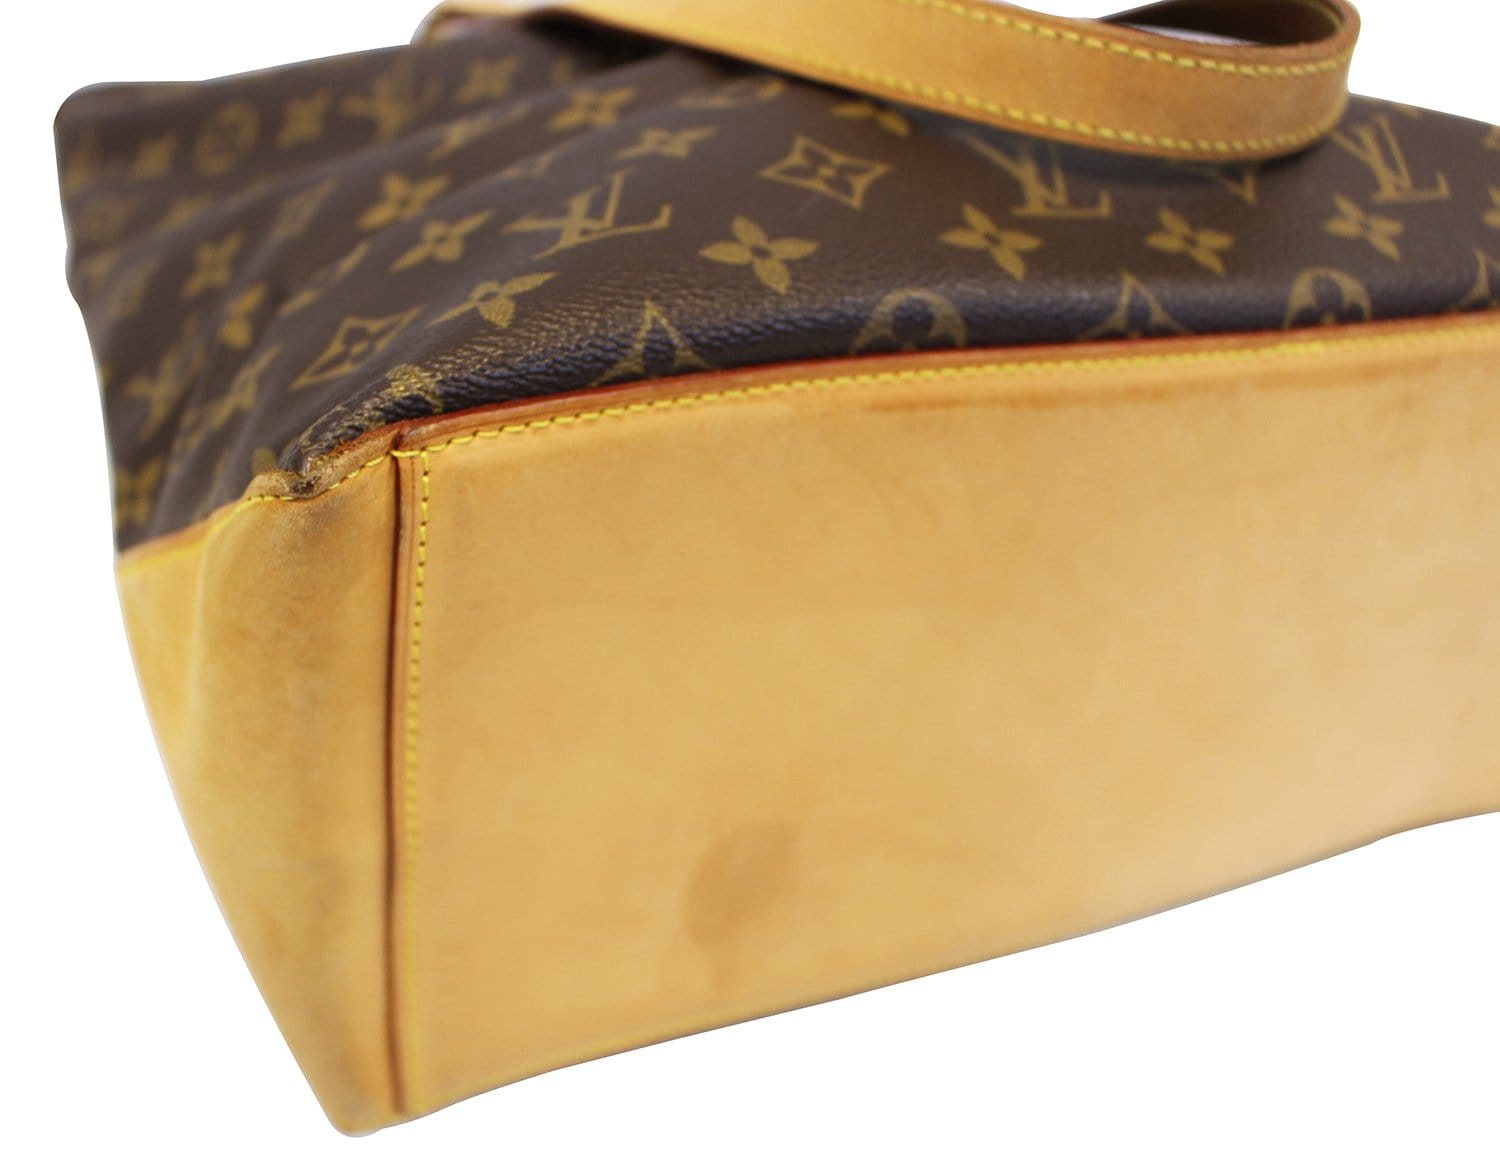 Check out this beautiful Louis Vuitton Cabas Mezzo @kluxybags